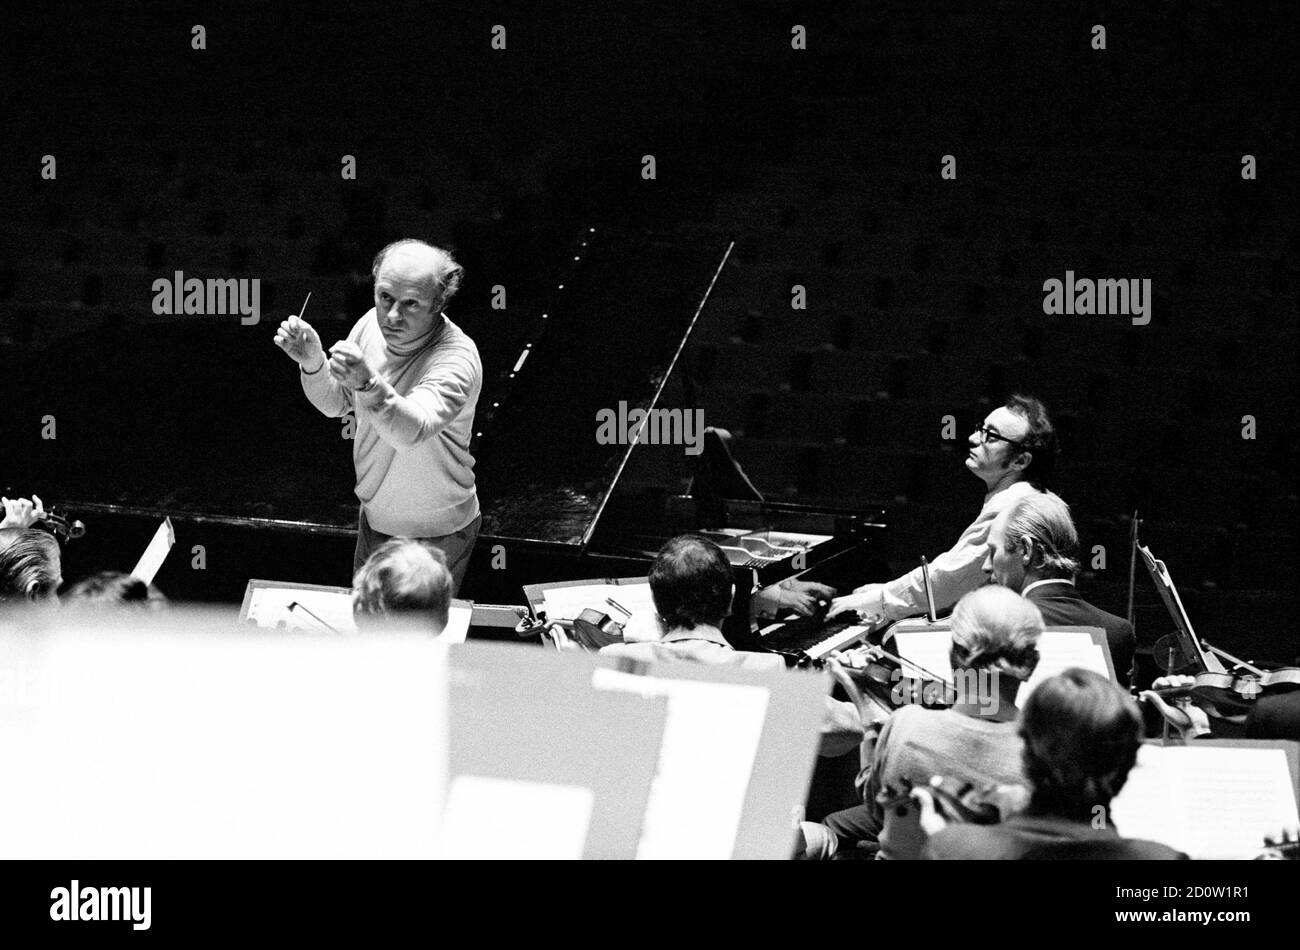 Bernard Haitink and Alfred Brendel rehearsing a Liszt piano concerto with the London Philharmonic Orchestra (LPO) in the Royal Festival Hall, London, May 1972 Stock Photo